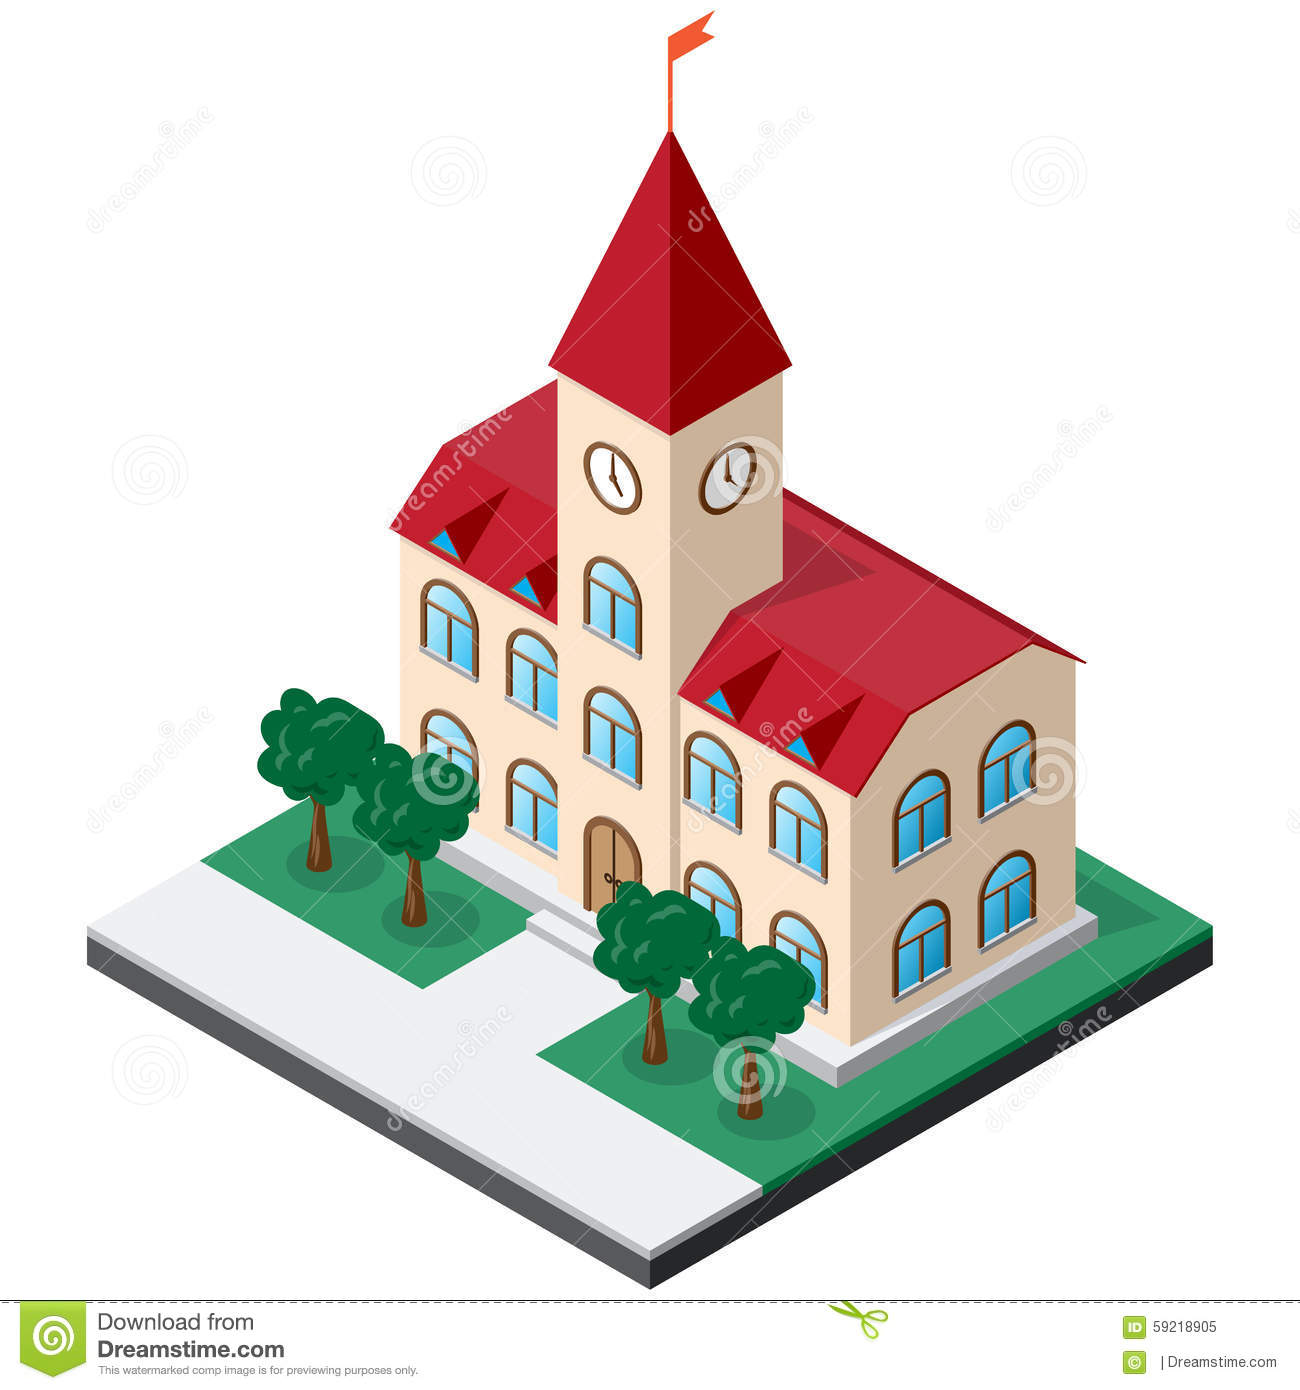 Red town hall clipart - Clipground